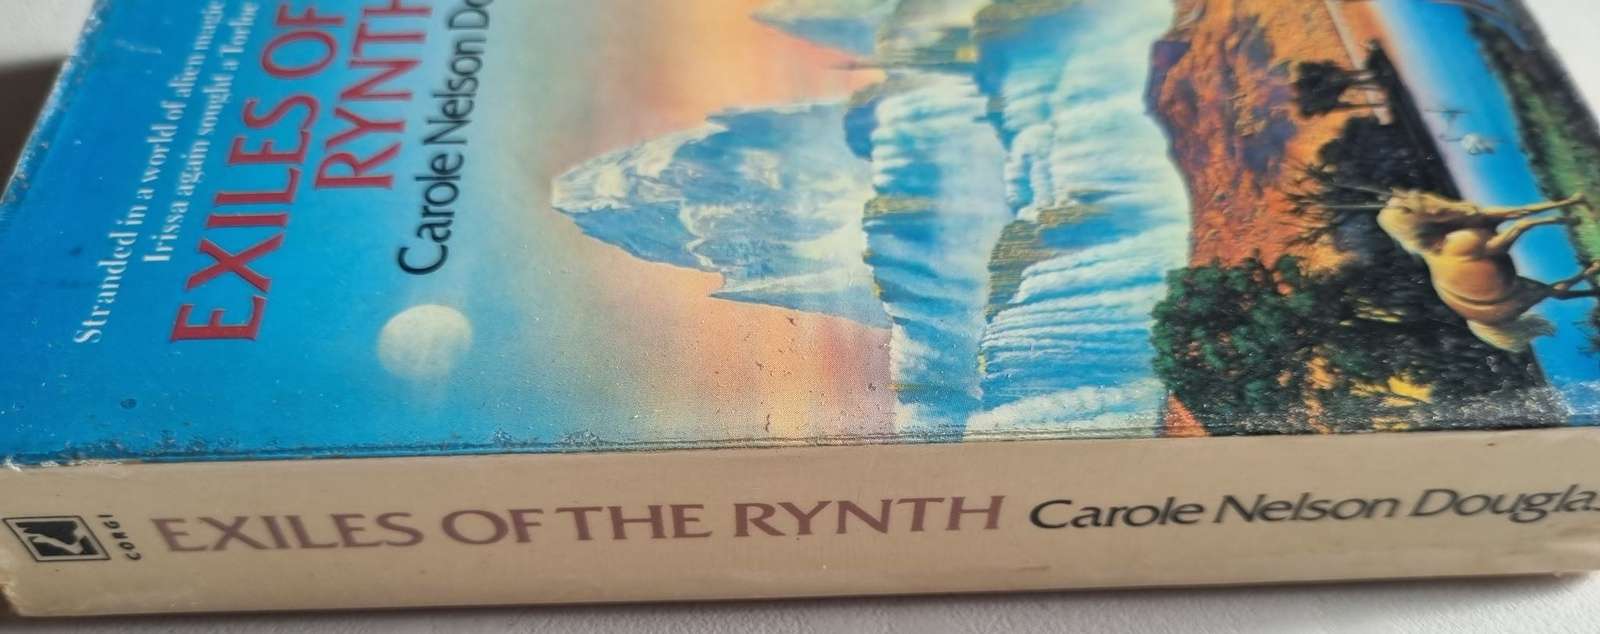 Exiles of the Rynth - Carole Nelson Douglas